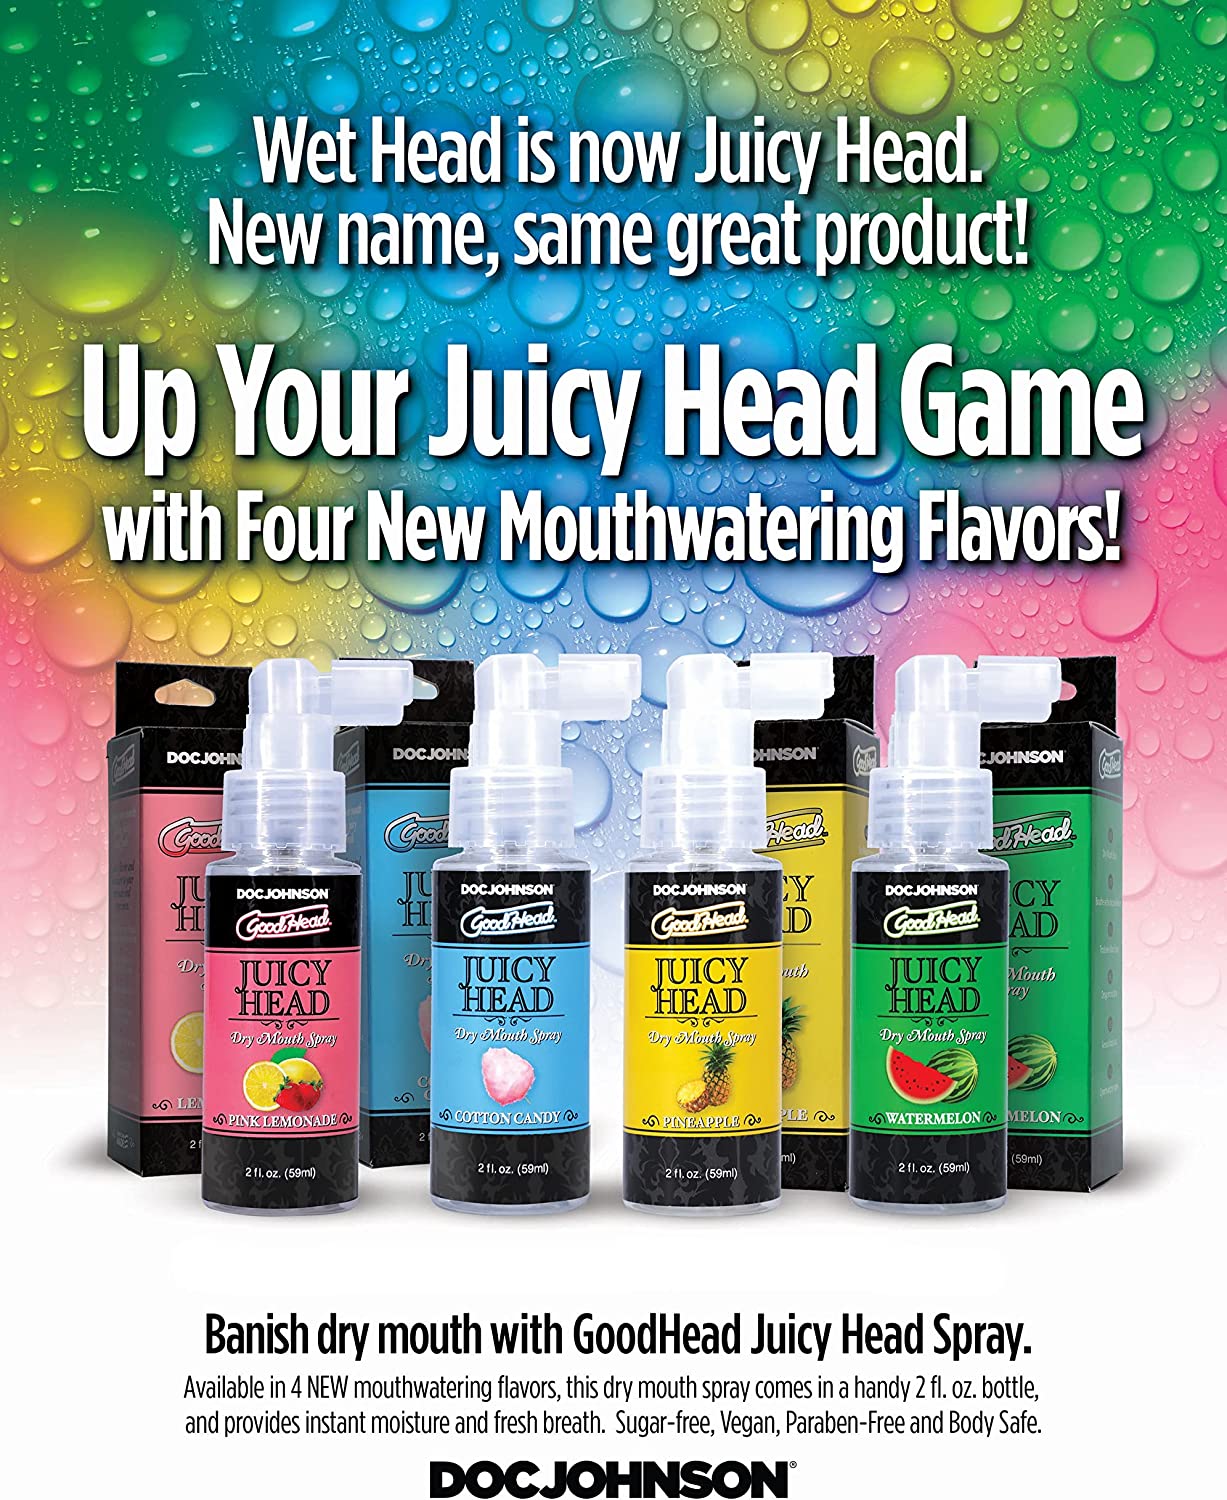 Ad for the Juicy Head line from GoodHead and Doc Johnson.